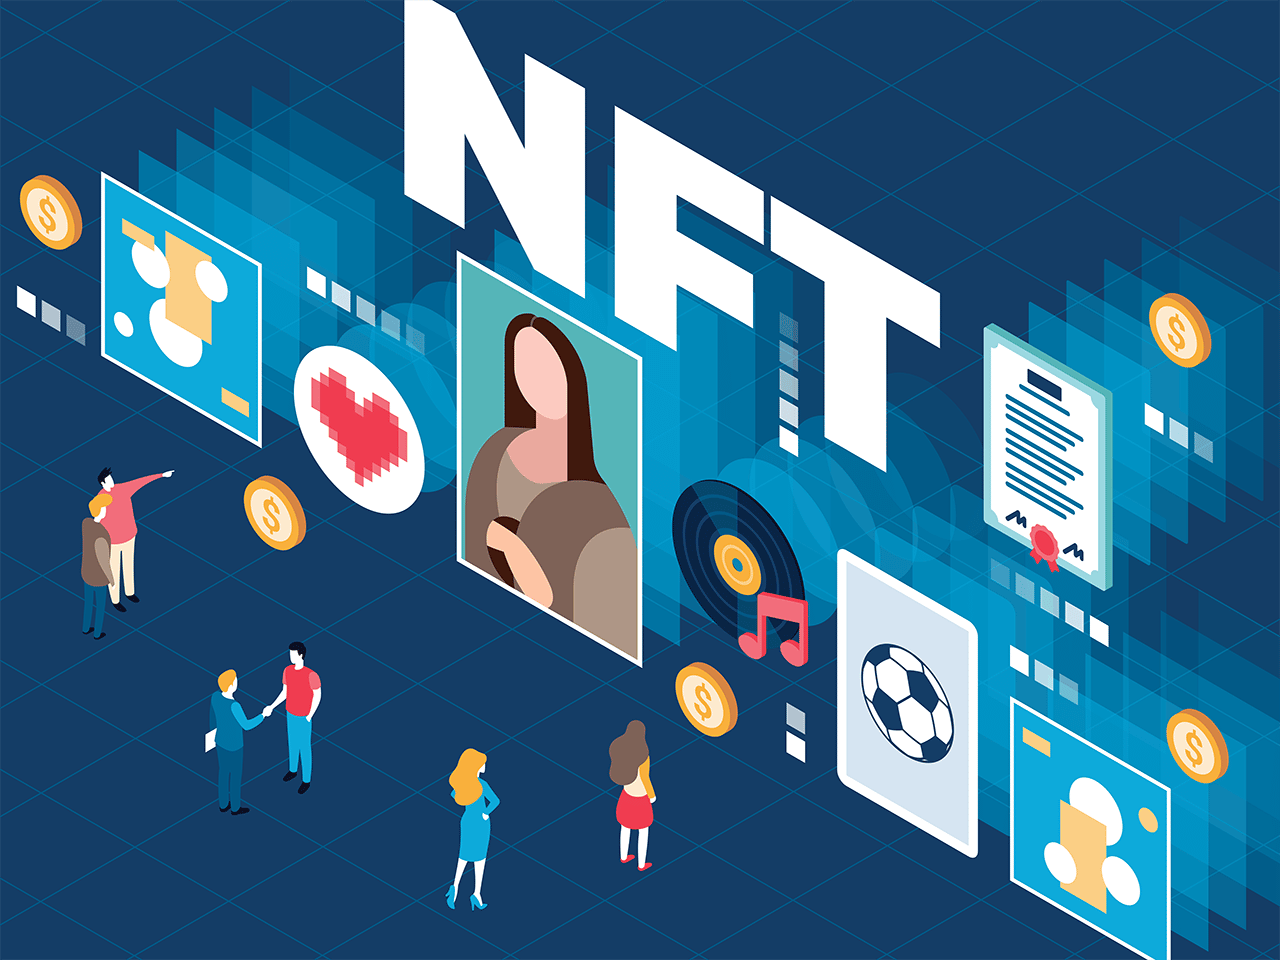 How To Make NFTs: A Guide for Digital Creators